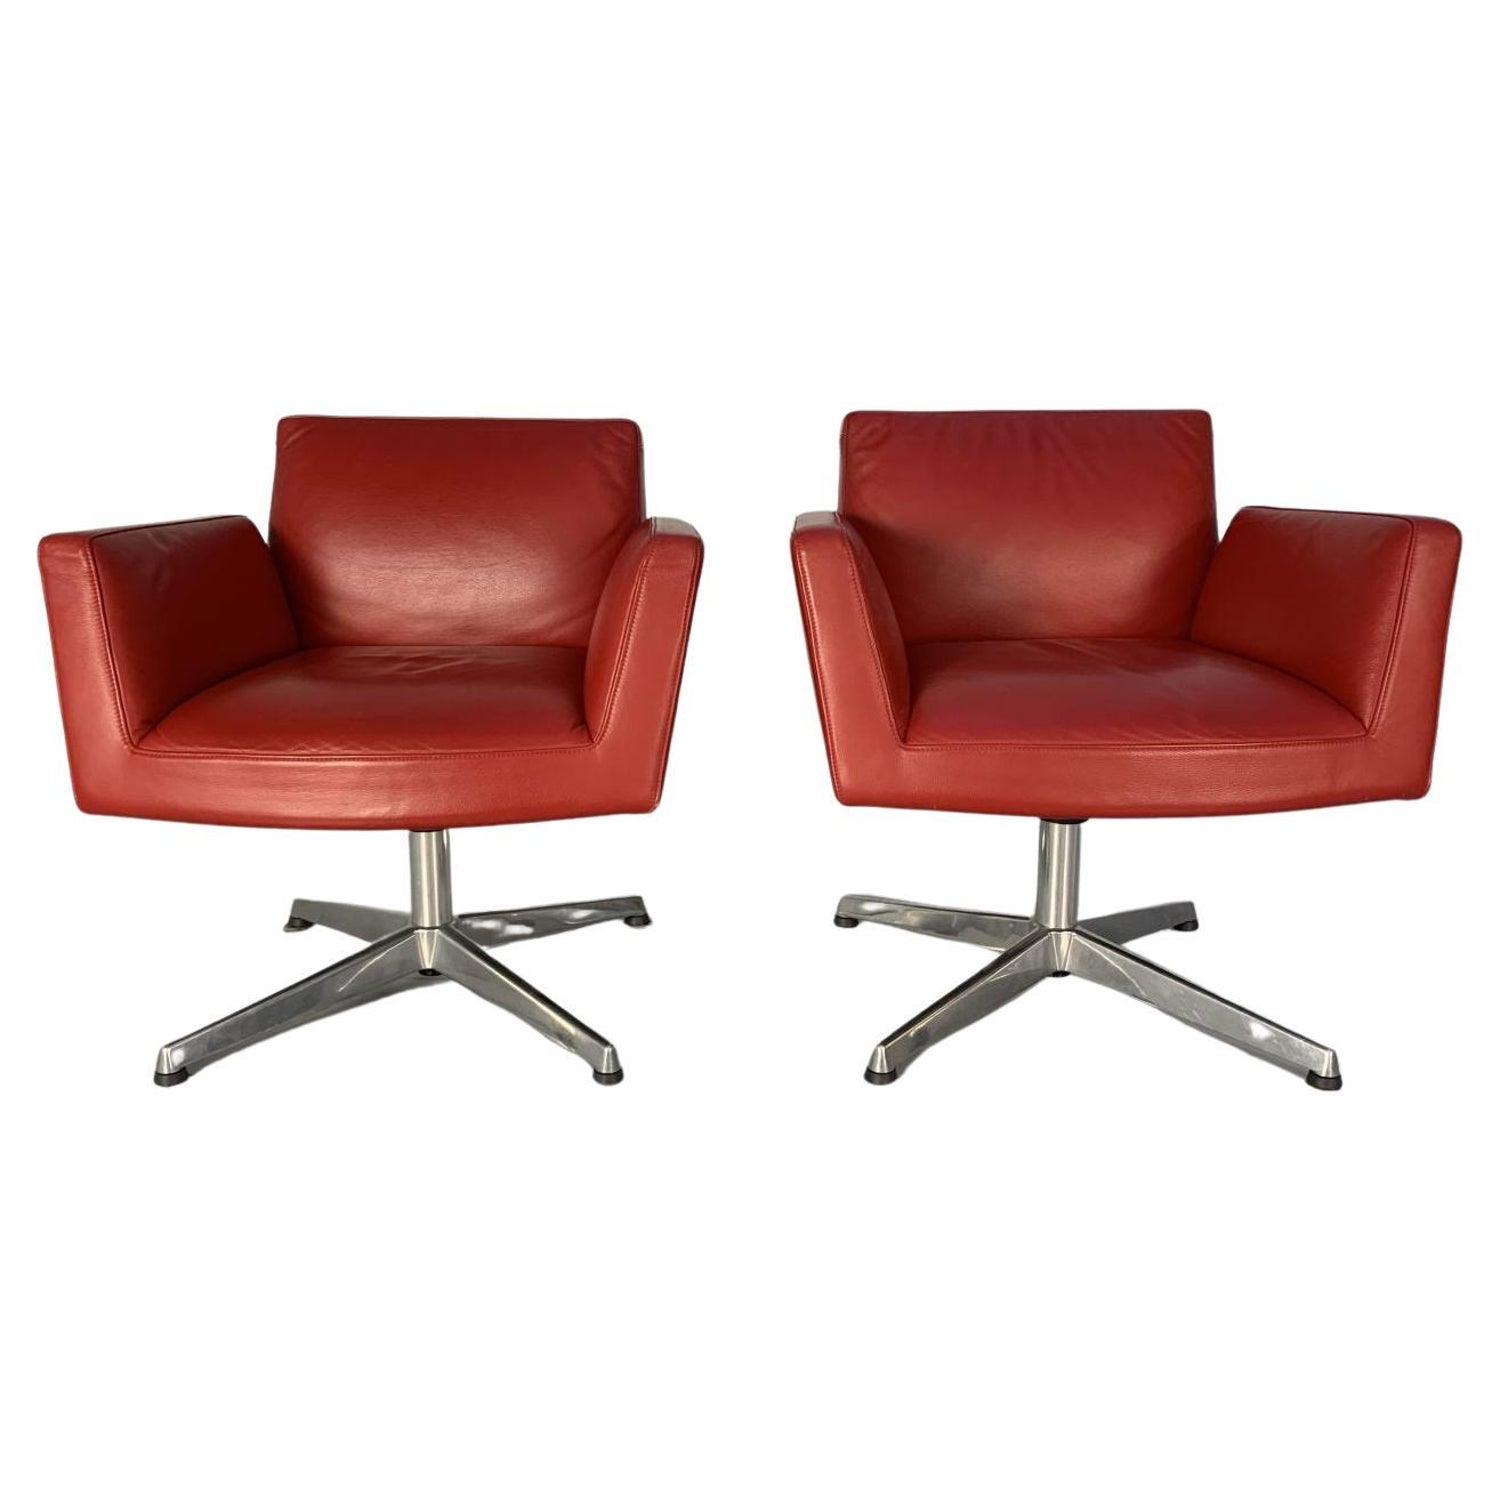 Three Leather Dining Office Chairs Poltrona Frau in Oxblood Red Leather For Sale at 1stDibs